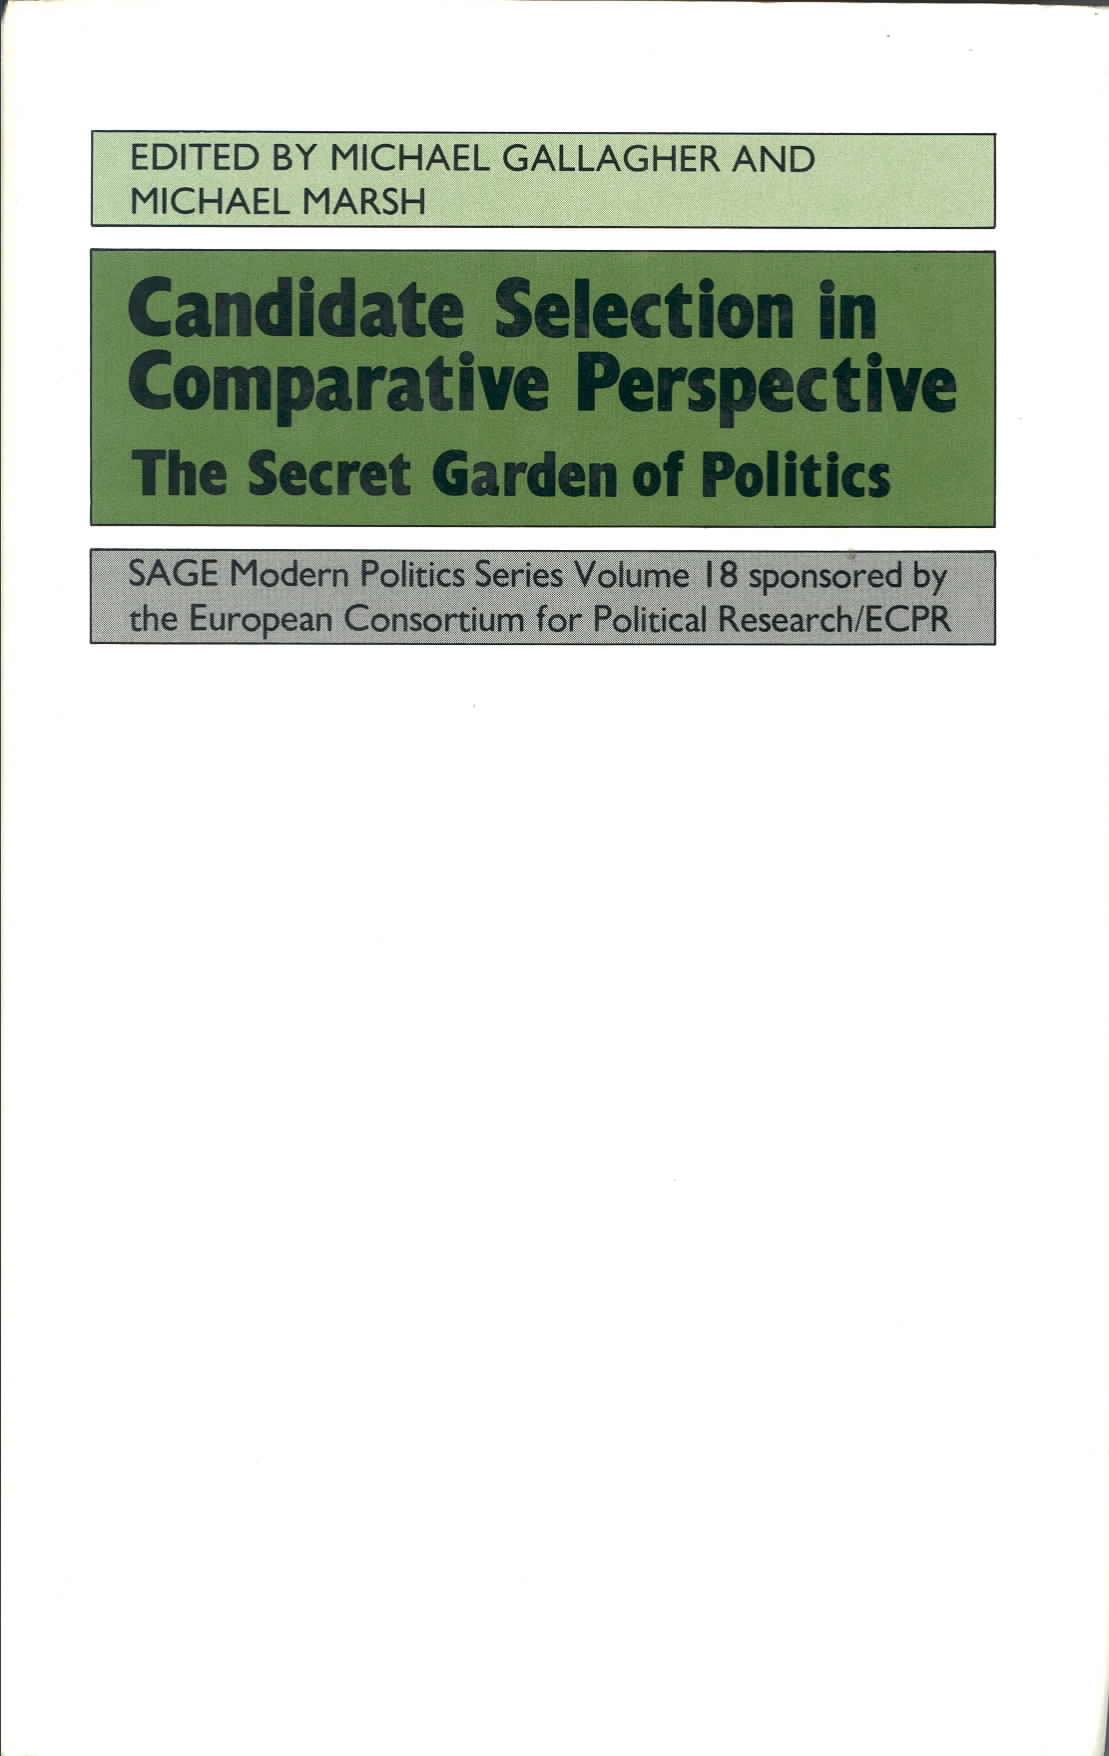 Cover of Candidate Selection in Comparative Perspective